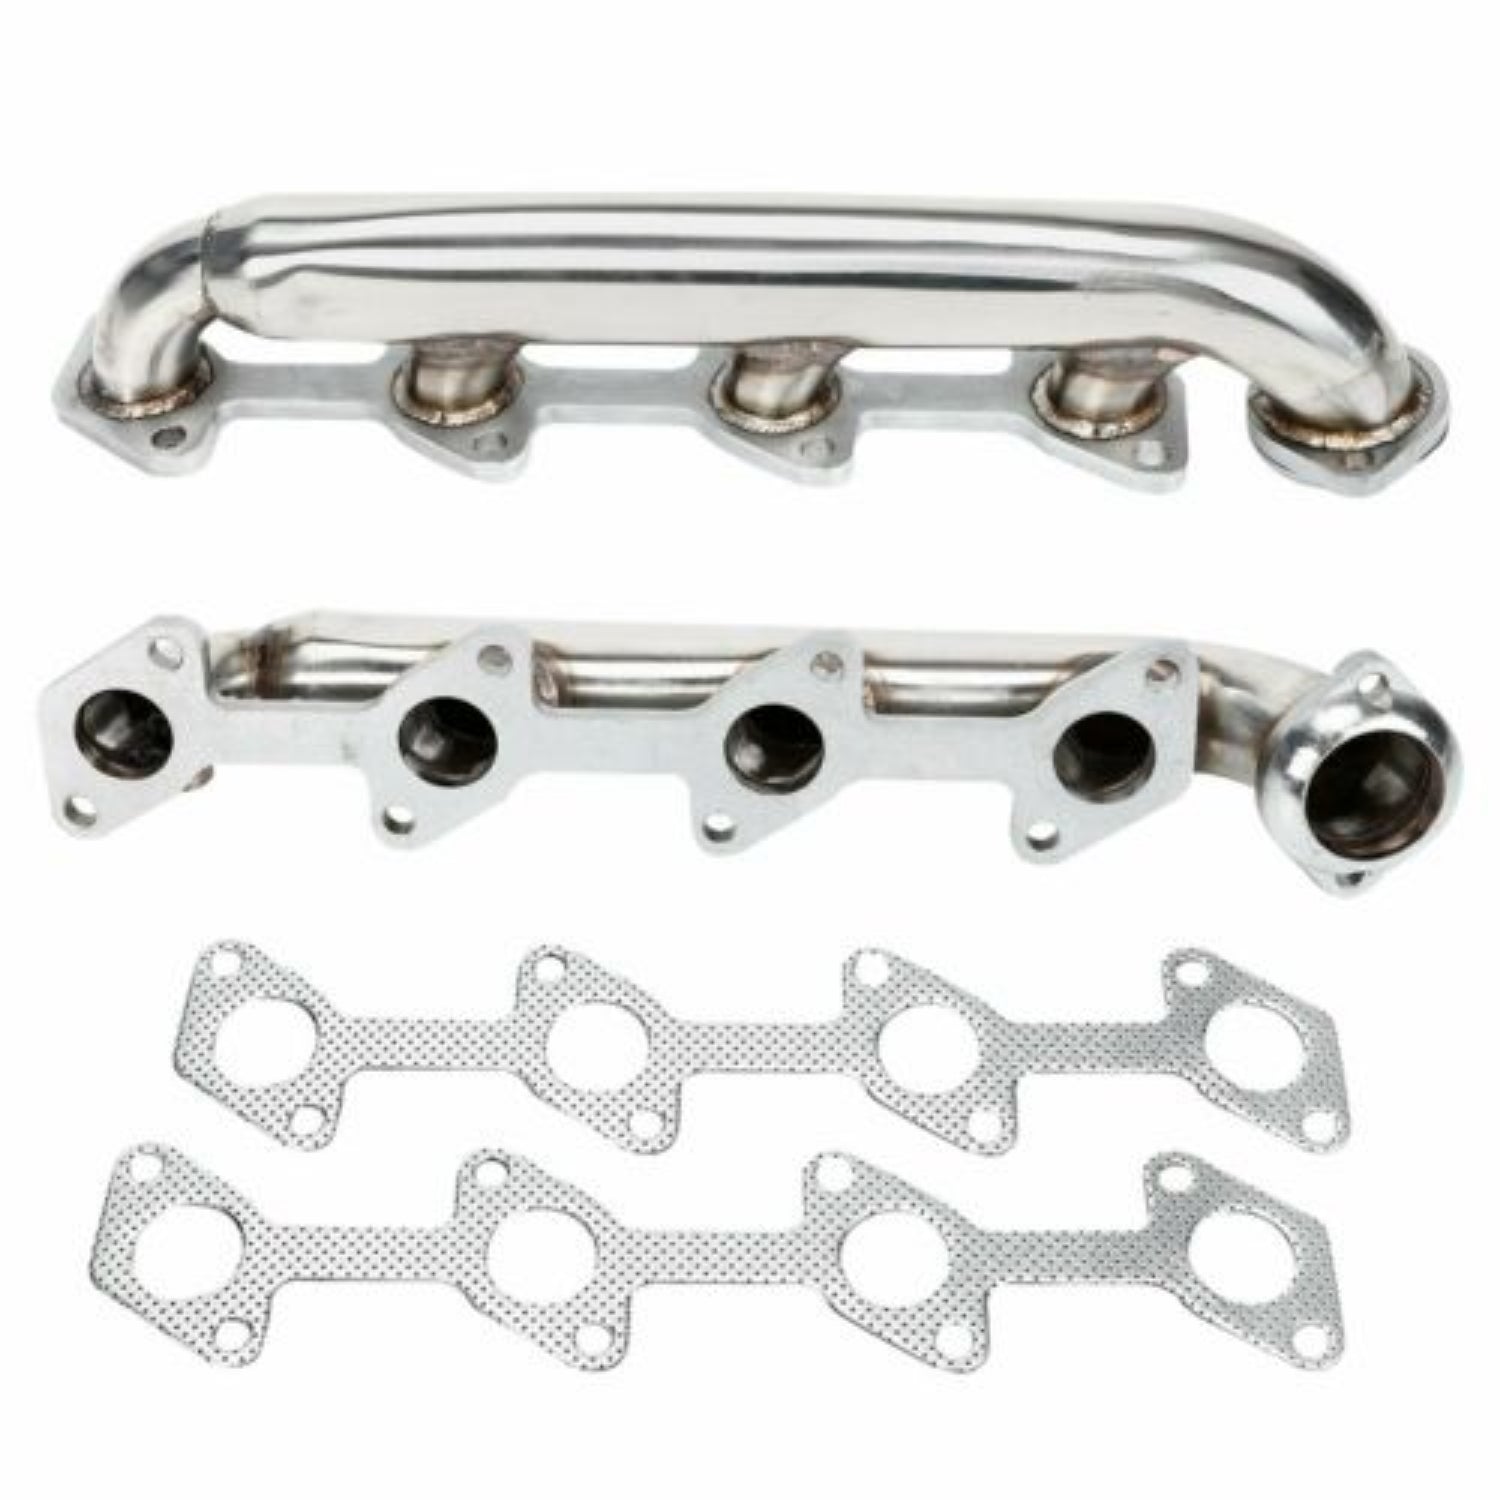 Performance Stainless Exhaust Manifold Headers for 2003-2007 Ford F250 F350 6.0L Powerstroke